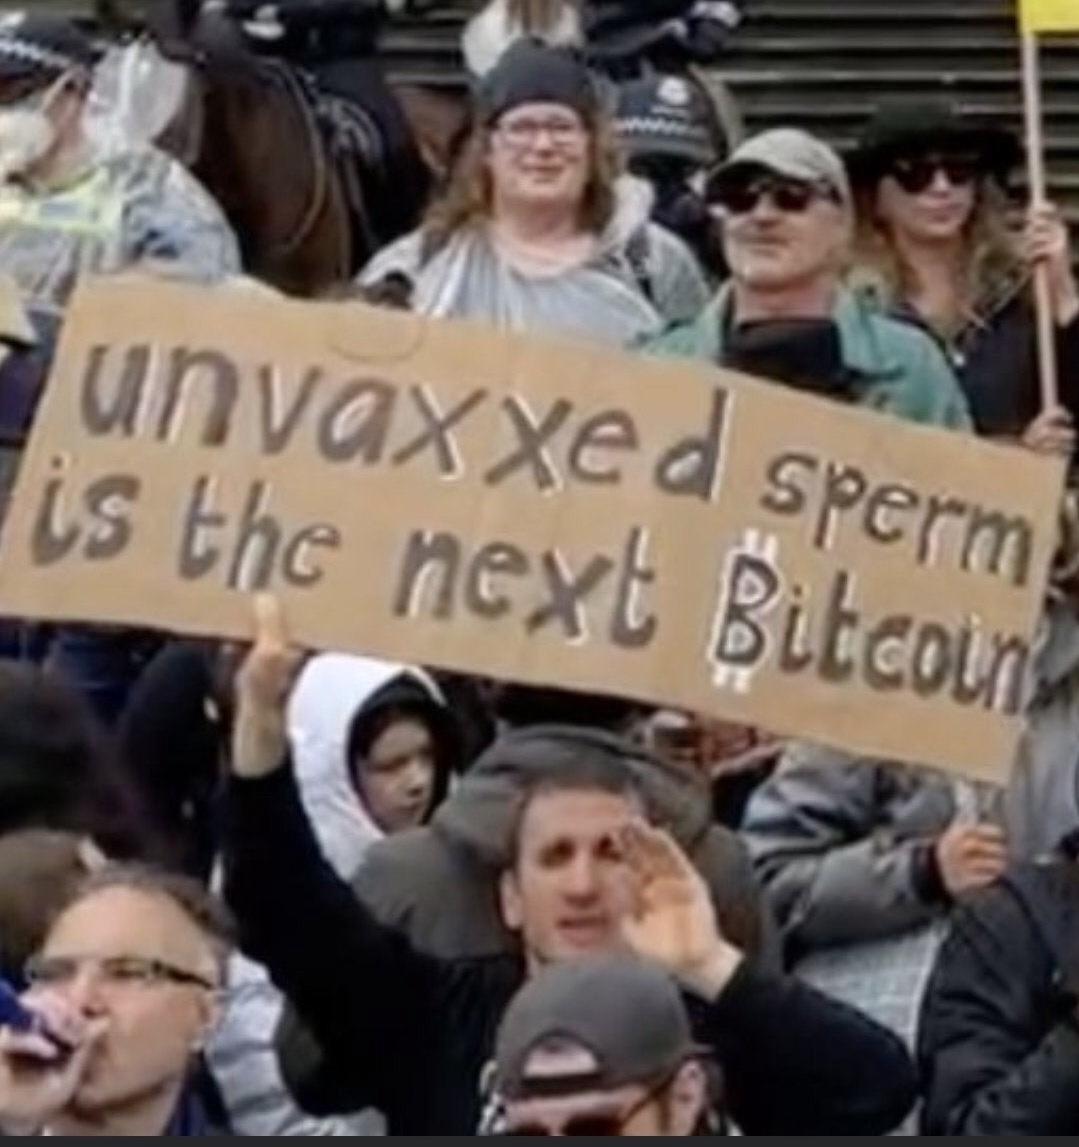 Unvaxxed Sperm Is The New Bitcoin